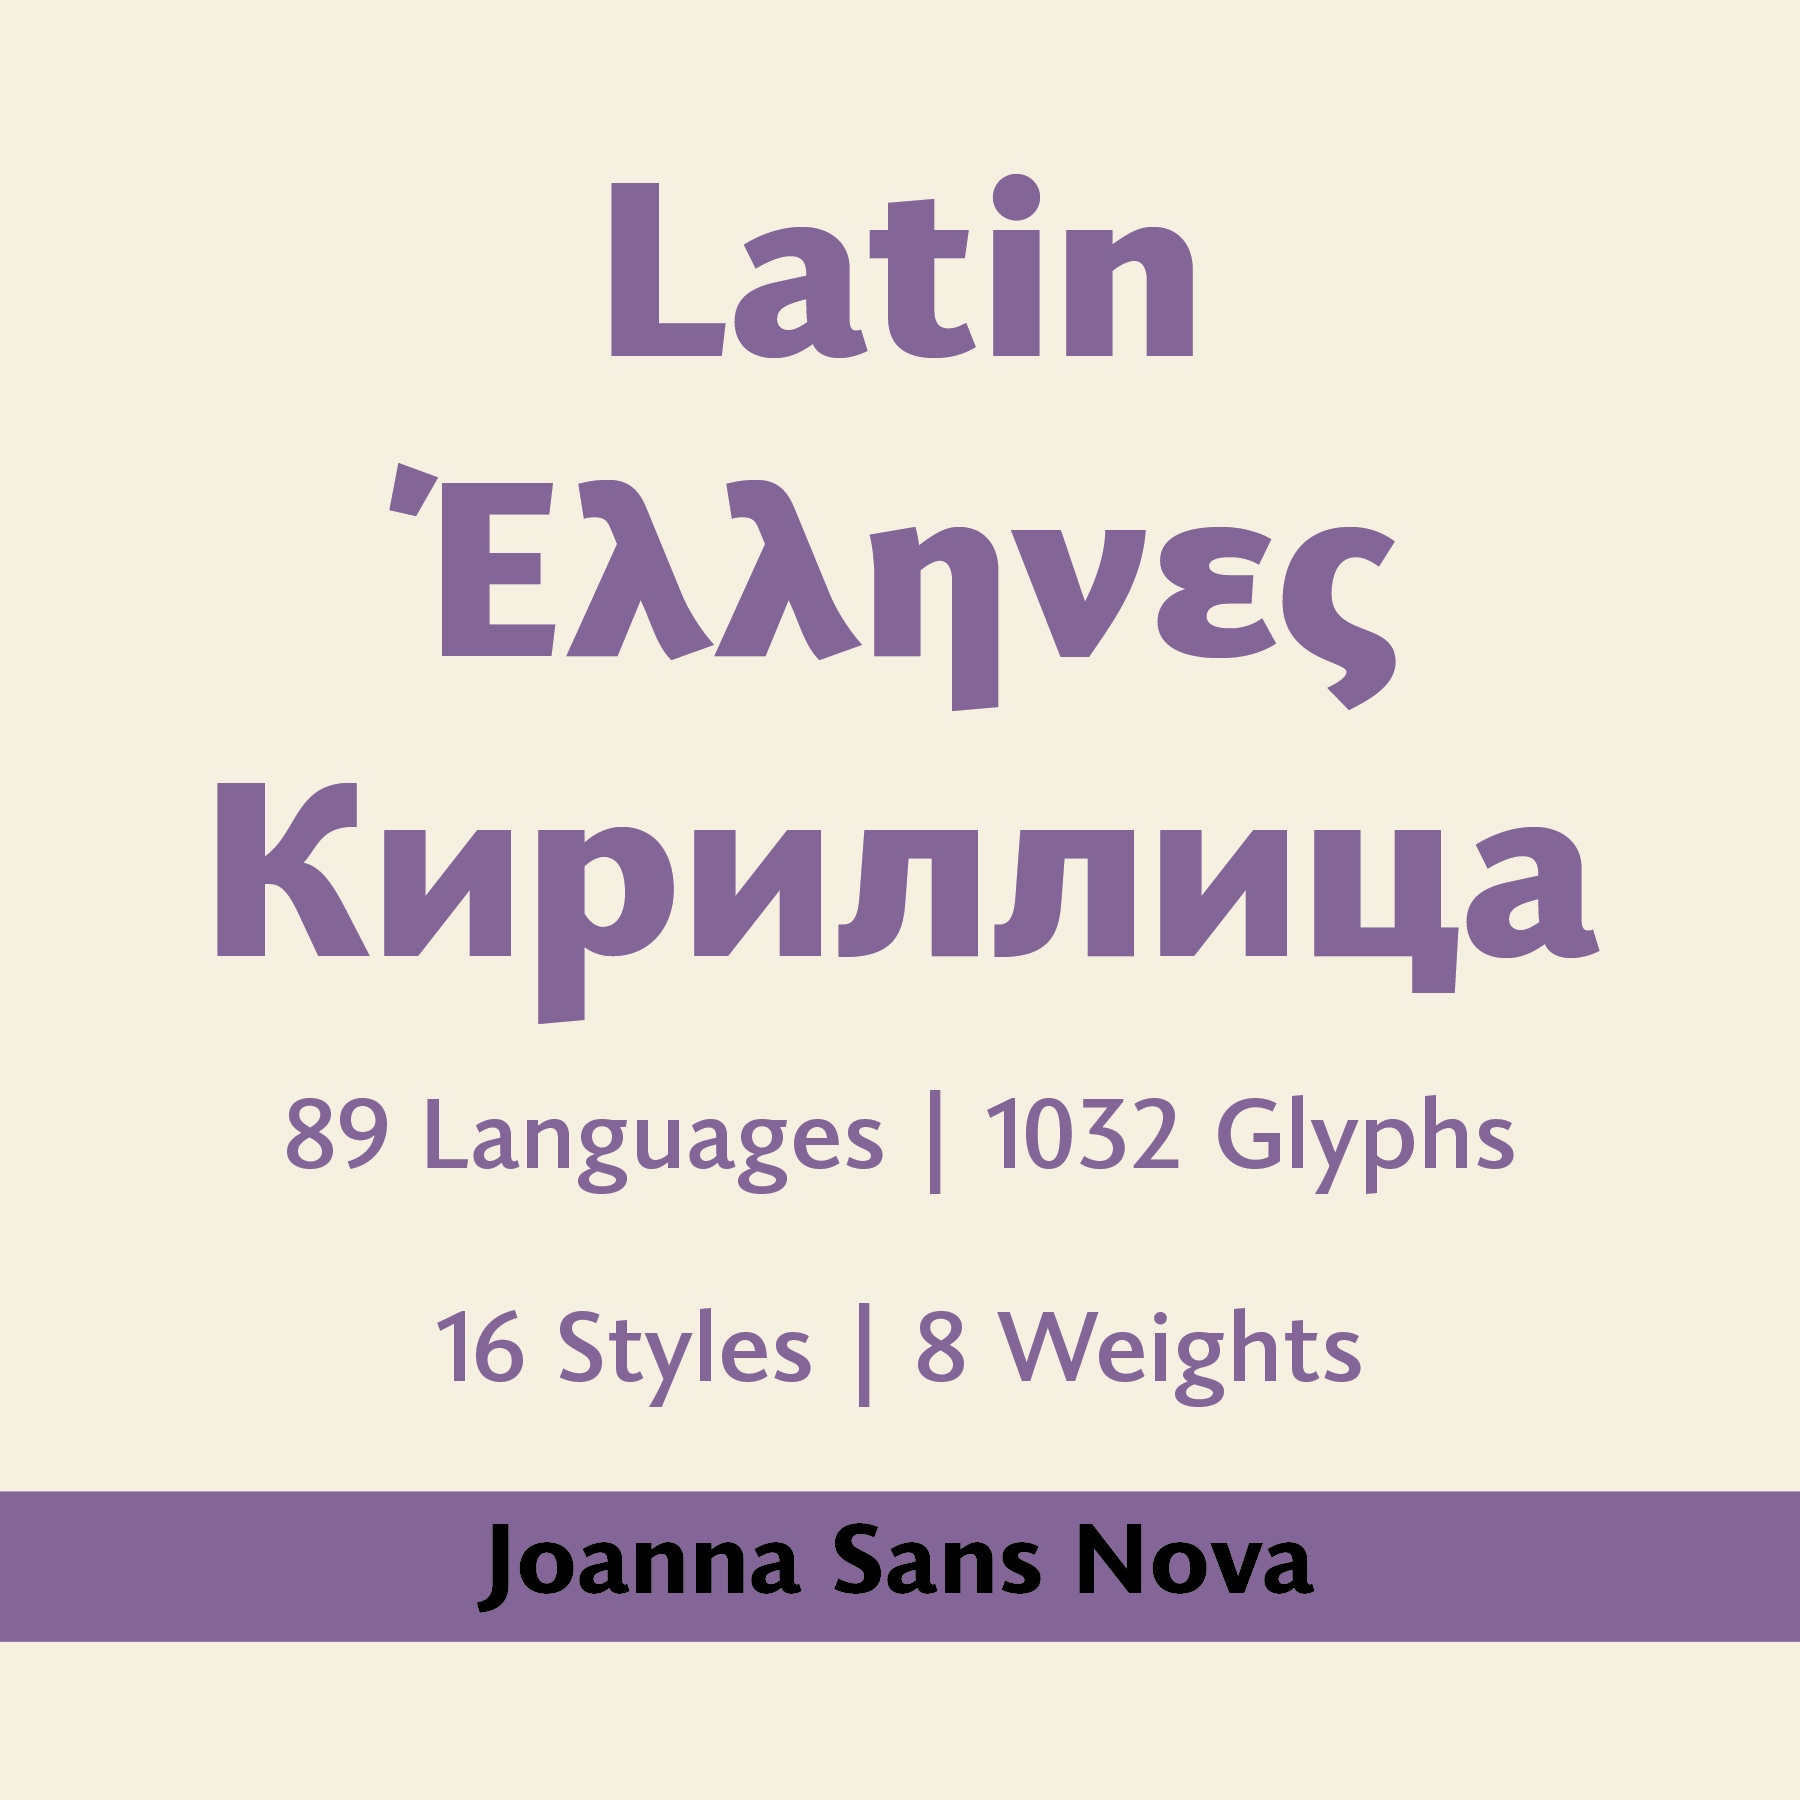  Joanna Sans Nova comes in Latin, Greek and Cyrillic scripts, covering 89 languages with over 1000 glyphs per style. 